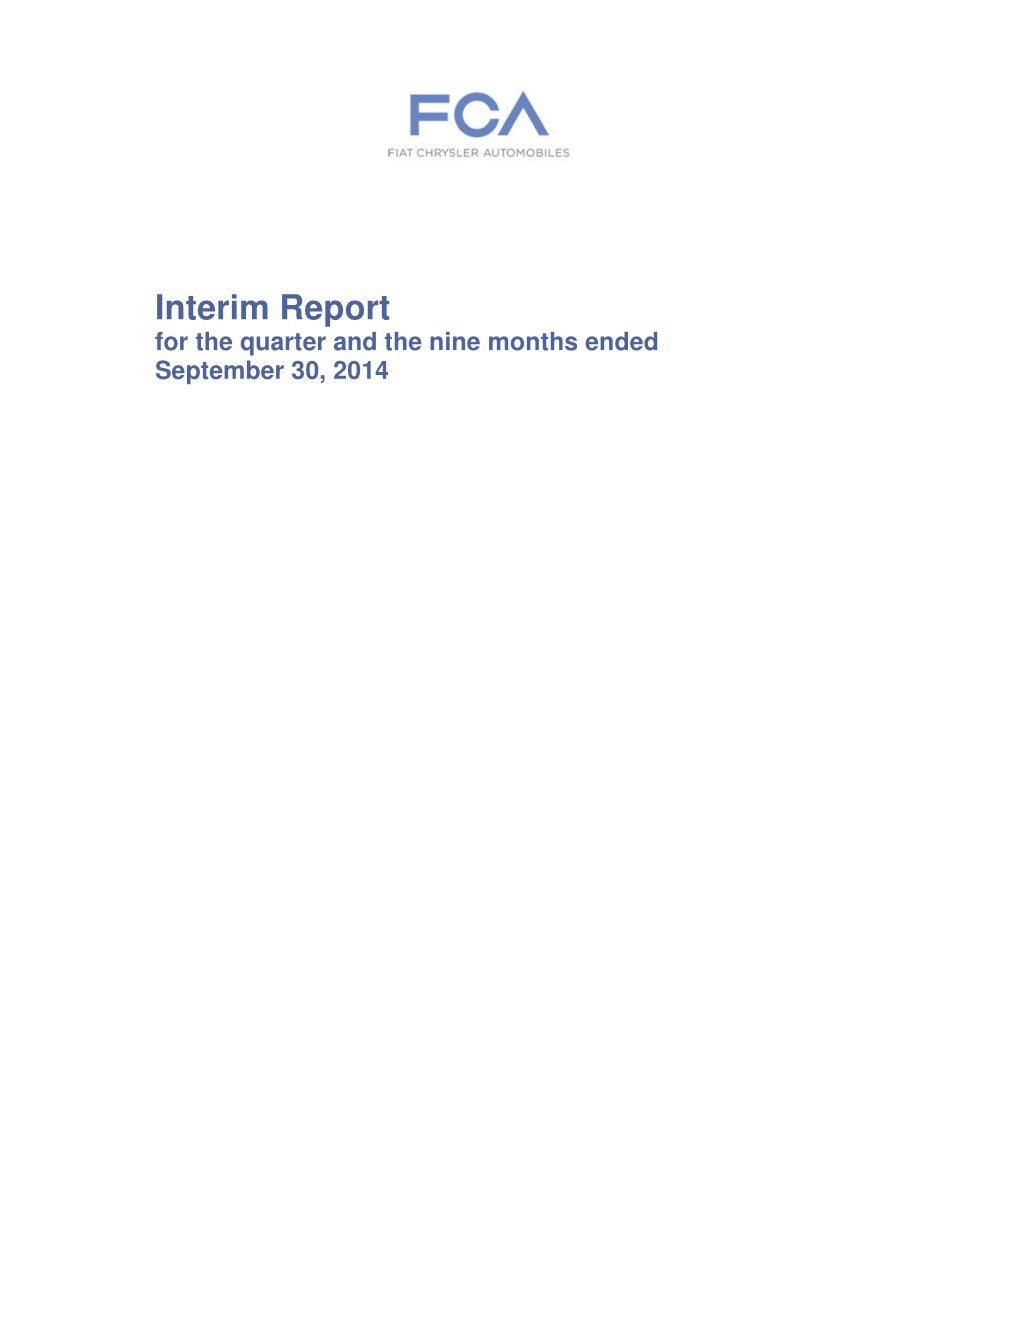 Interim Report for the Quarter and the Nine Months Ended September 30, 2014